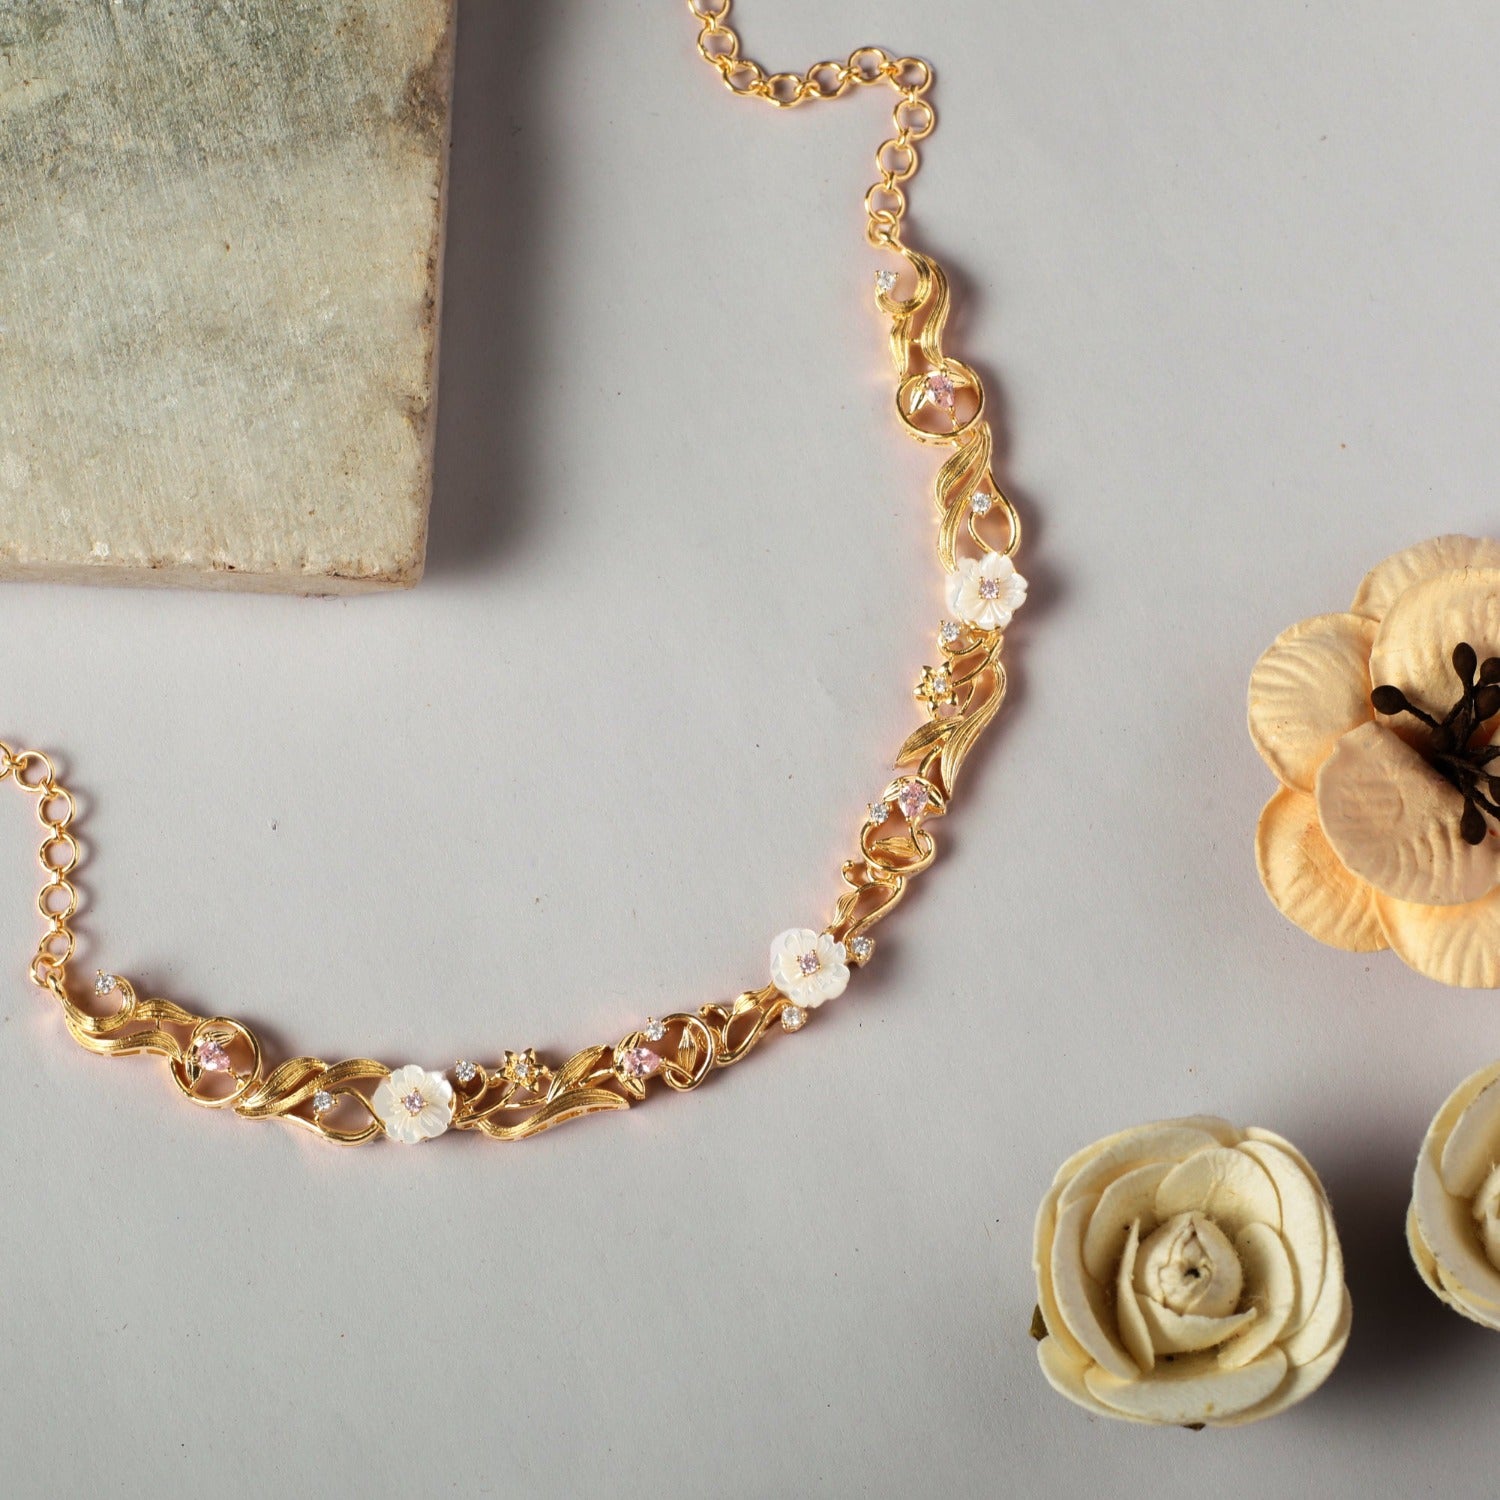 Blossom Veil Blooming Silver Short Necklace